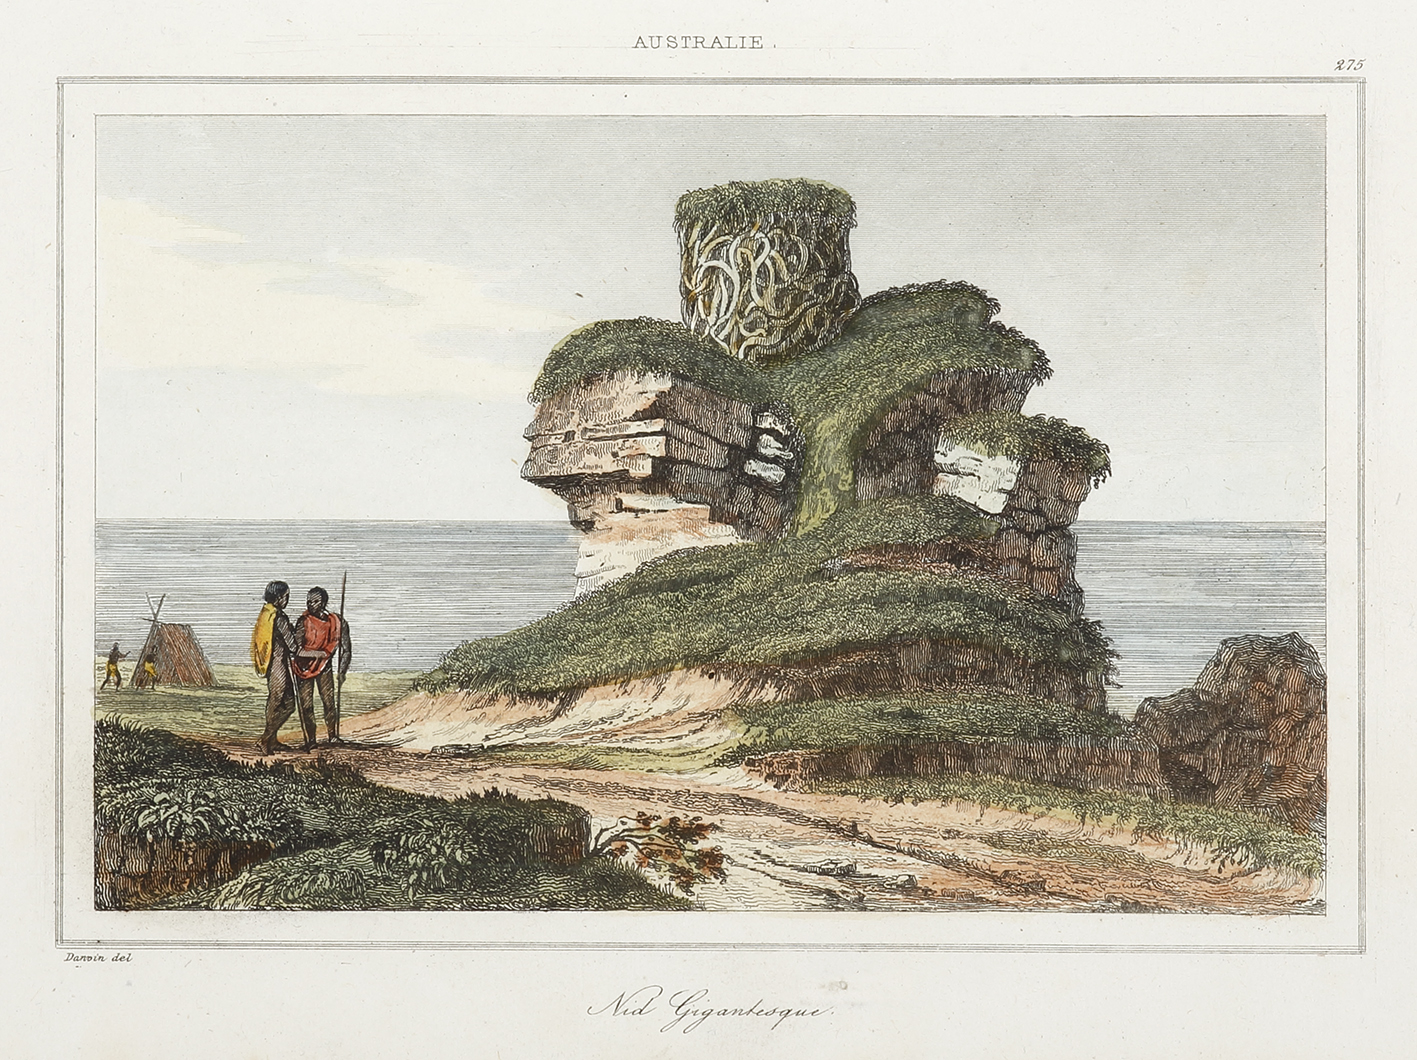 WA-Nid Gigantesque. - Antique View from 1837